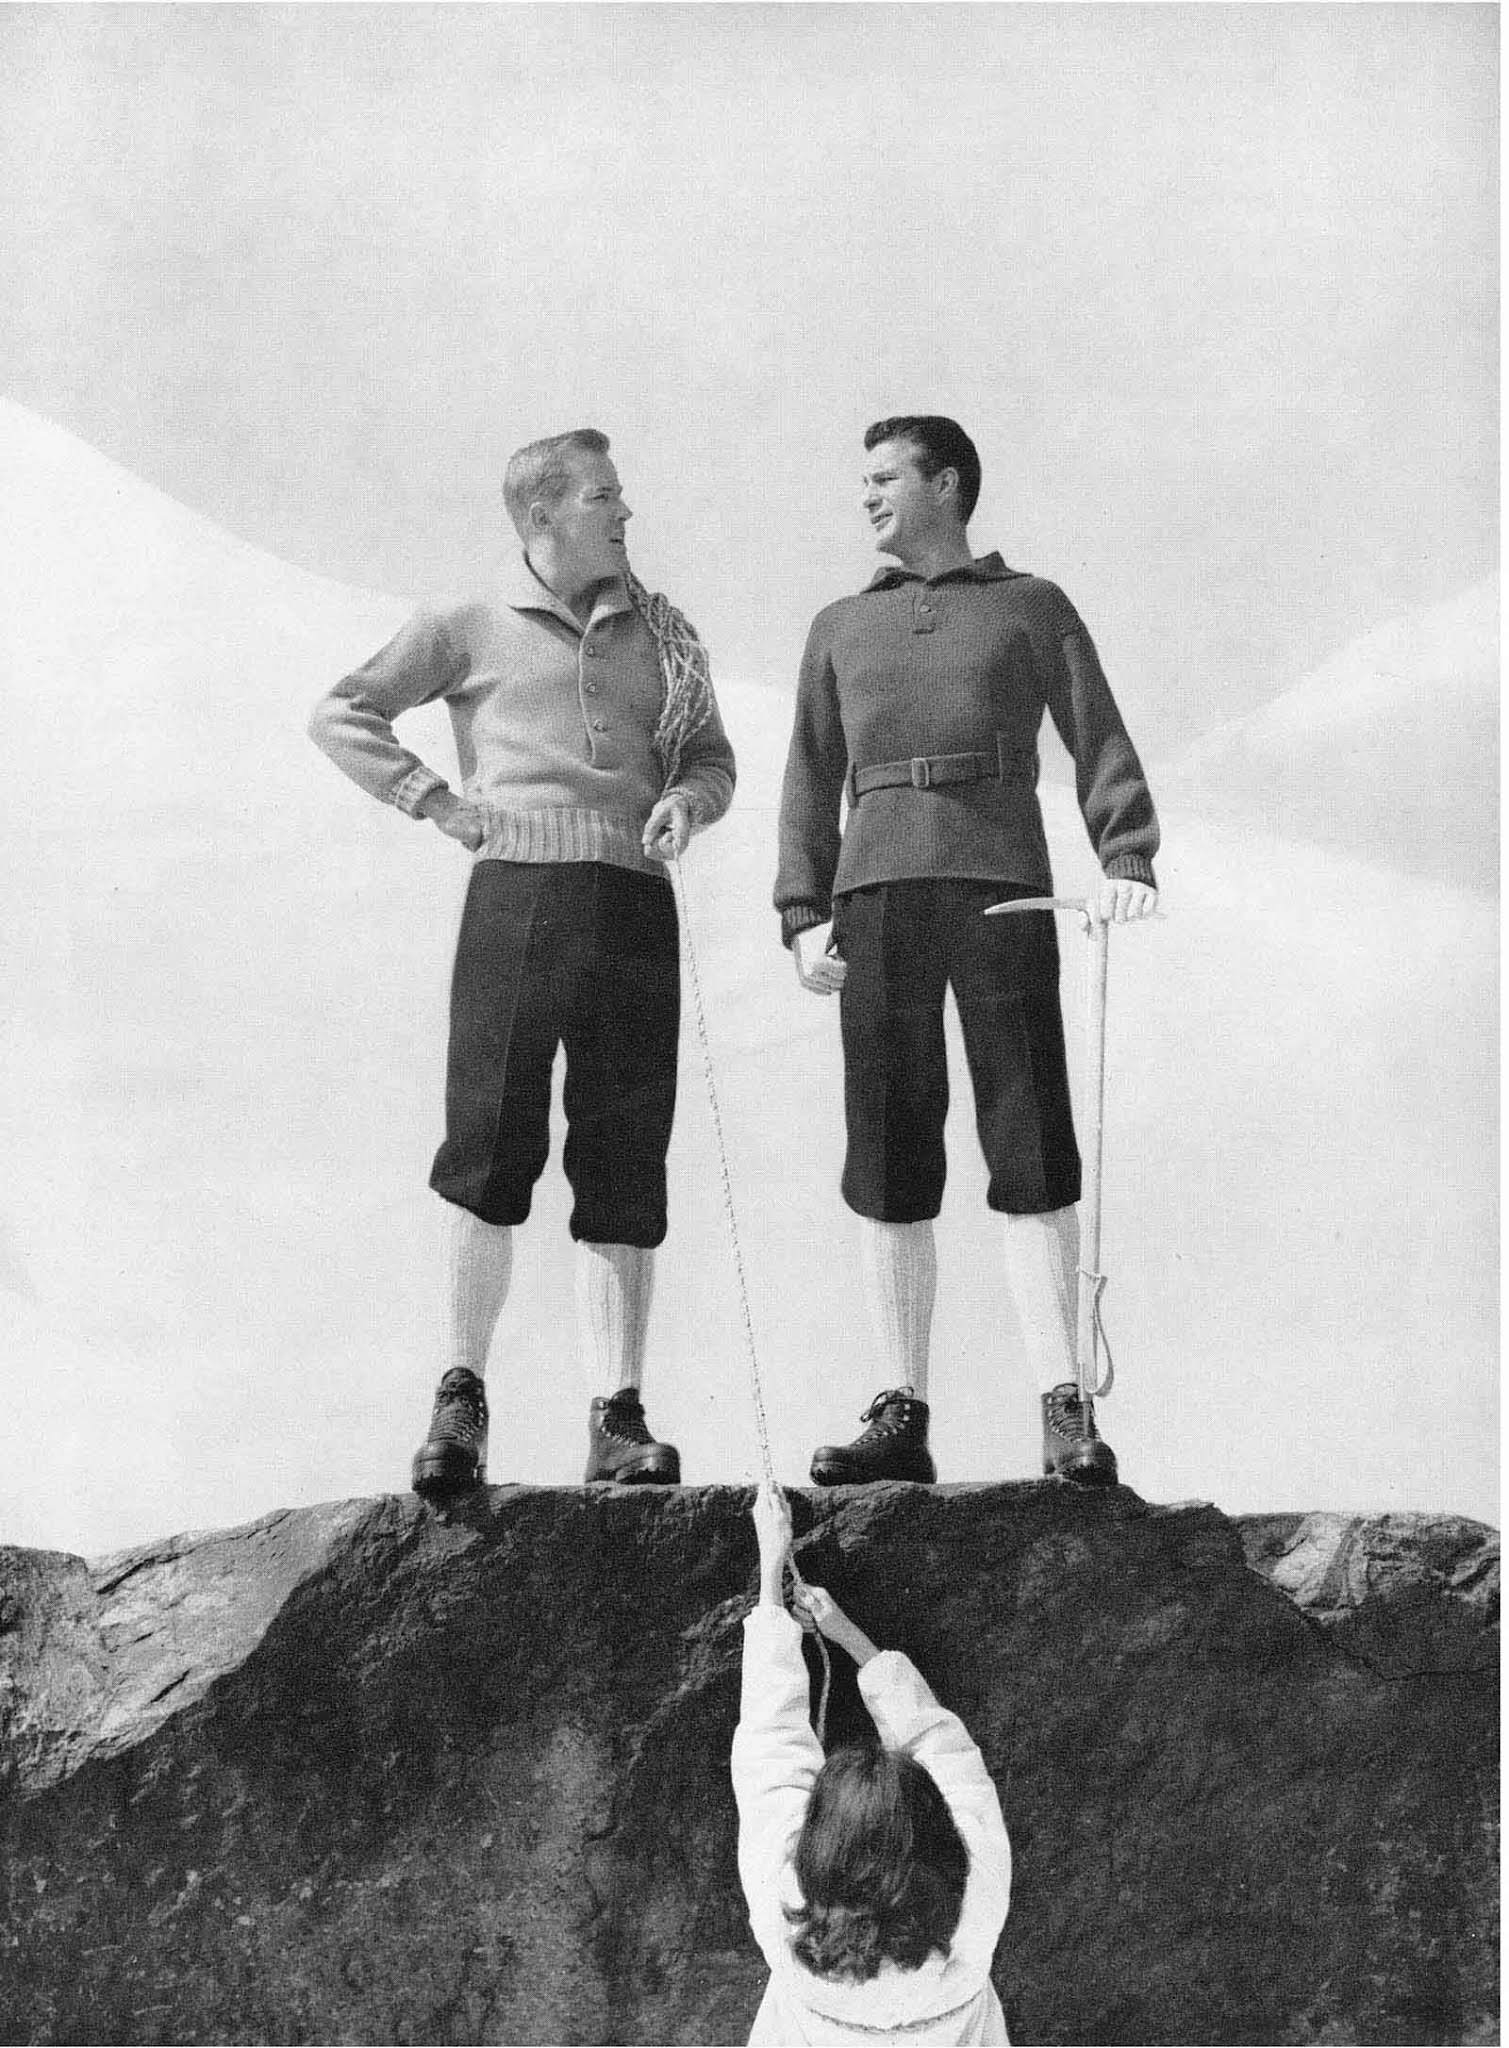 Men are better than women!’ This advert for sweaters said wives were ‘a bit of a drag’ on a mountain.